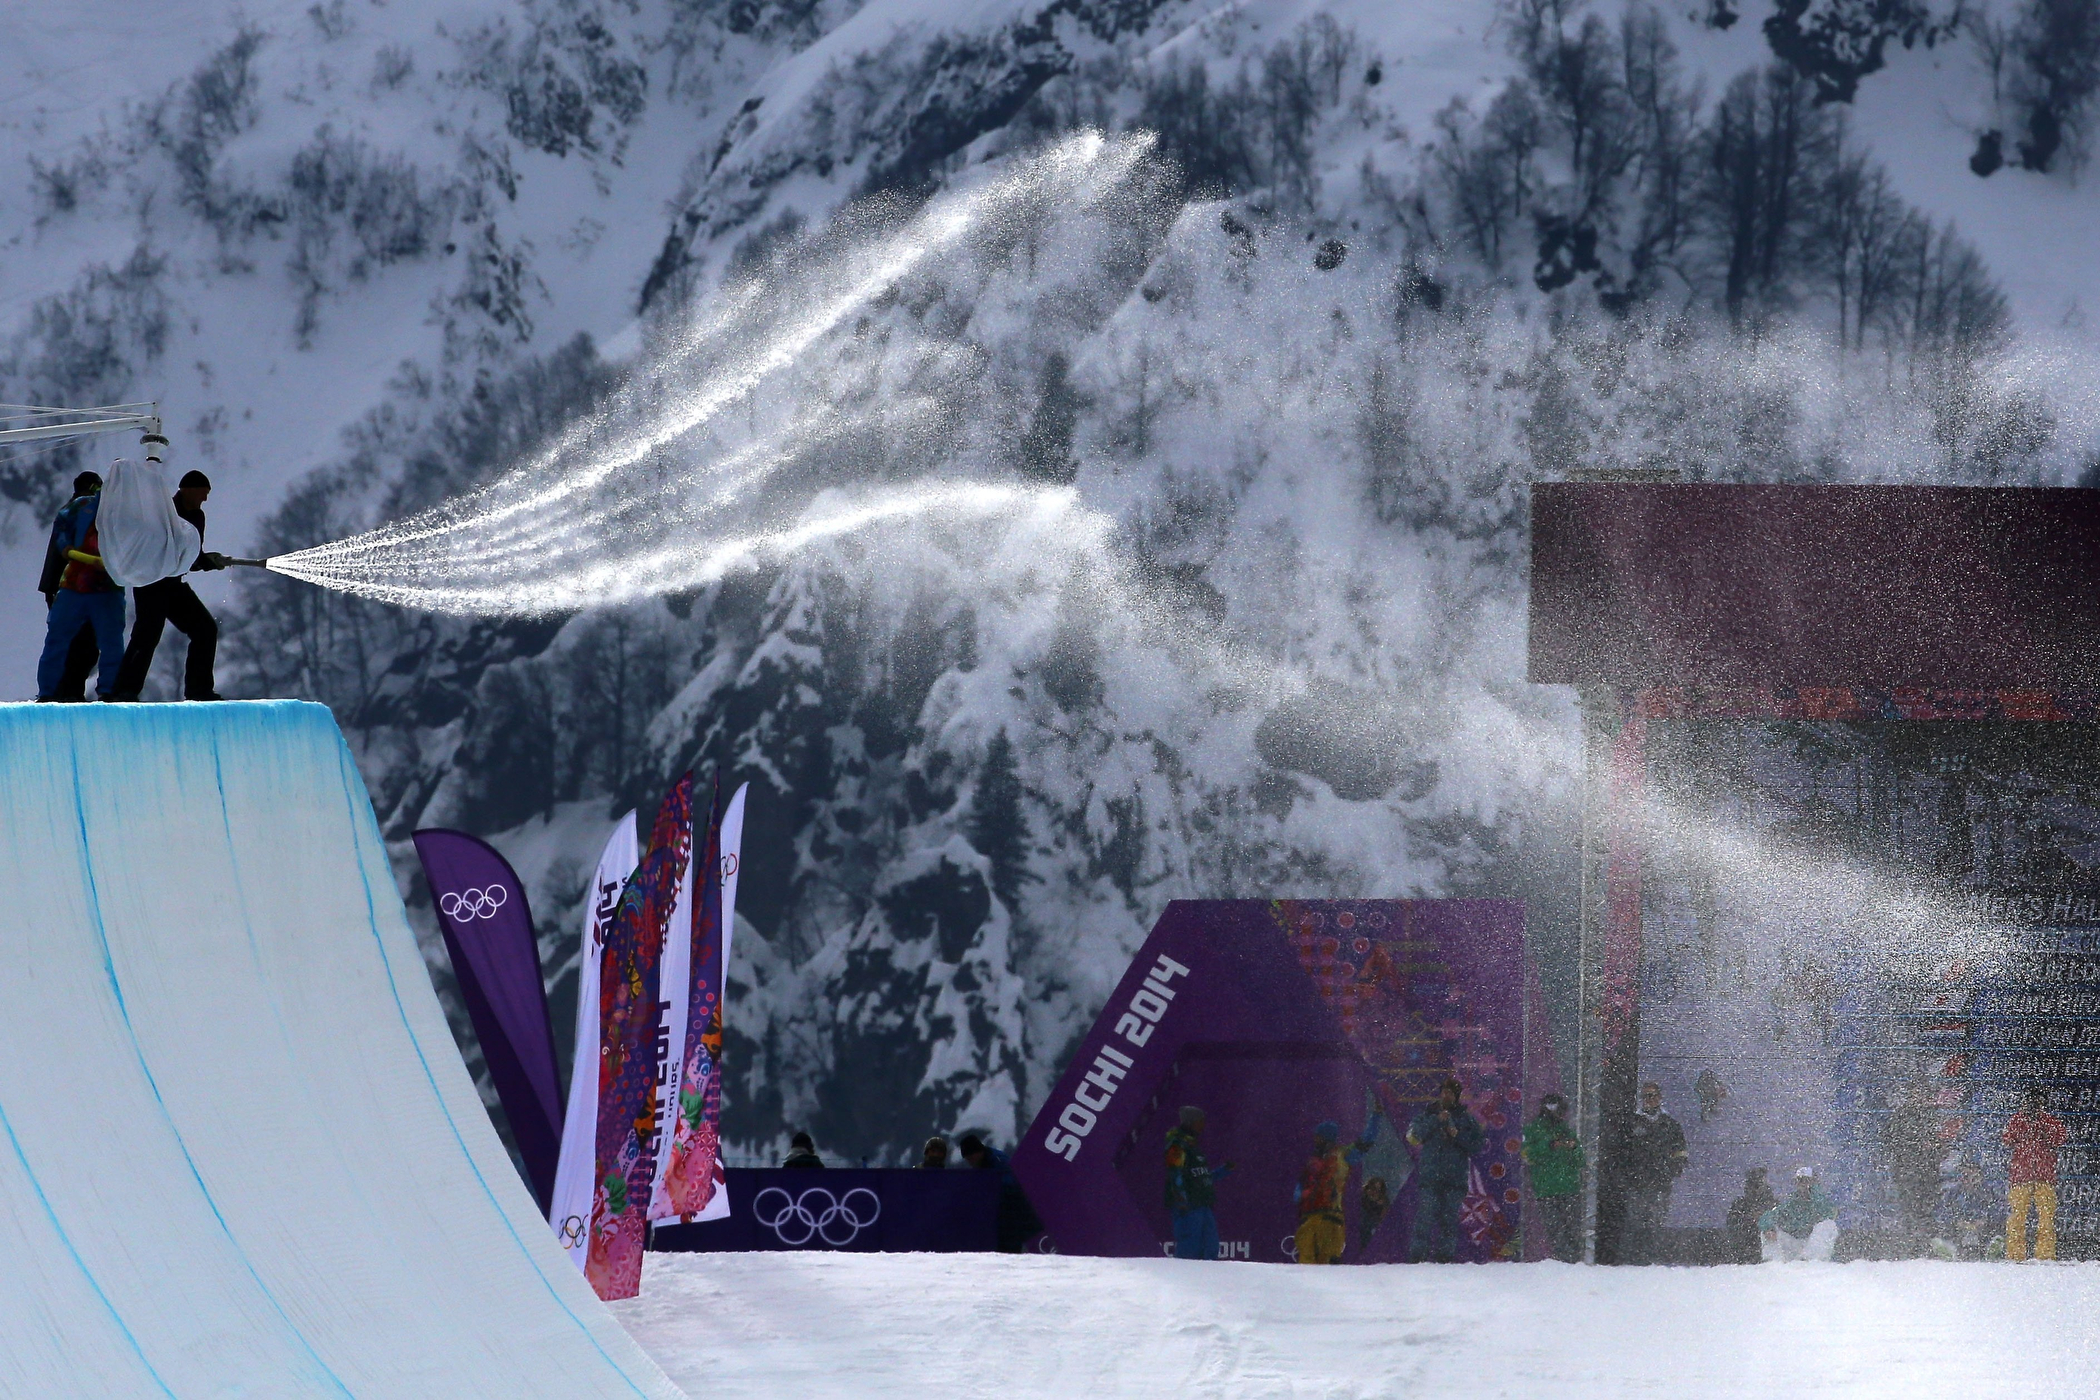 Workers spray down the halfpipe before competition begins in the Snowboard Men's Halfpipe Qualification Heats on day four of the Sochi 2014 Winter Olympics at Rosa Khutor Extreme Park on Feb. 11, 2014 in Sochi, Russia.